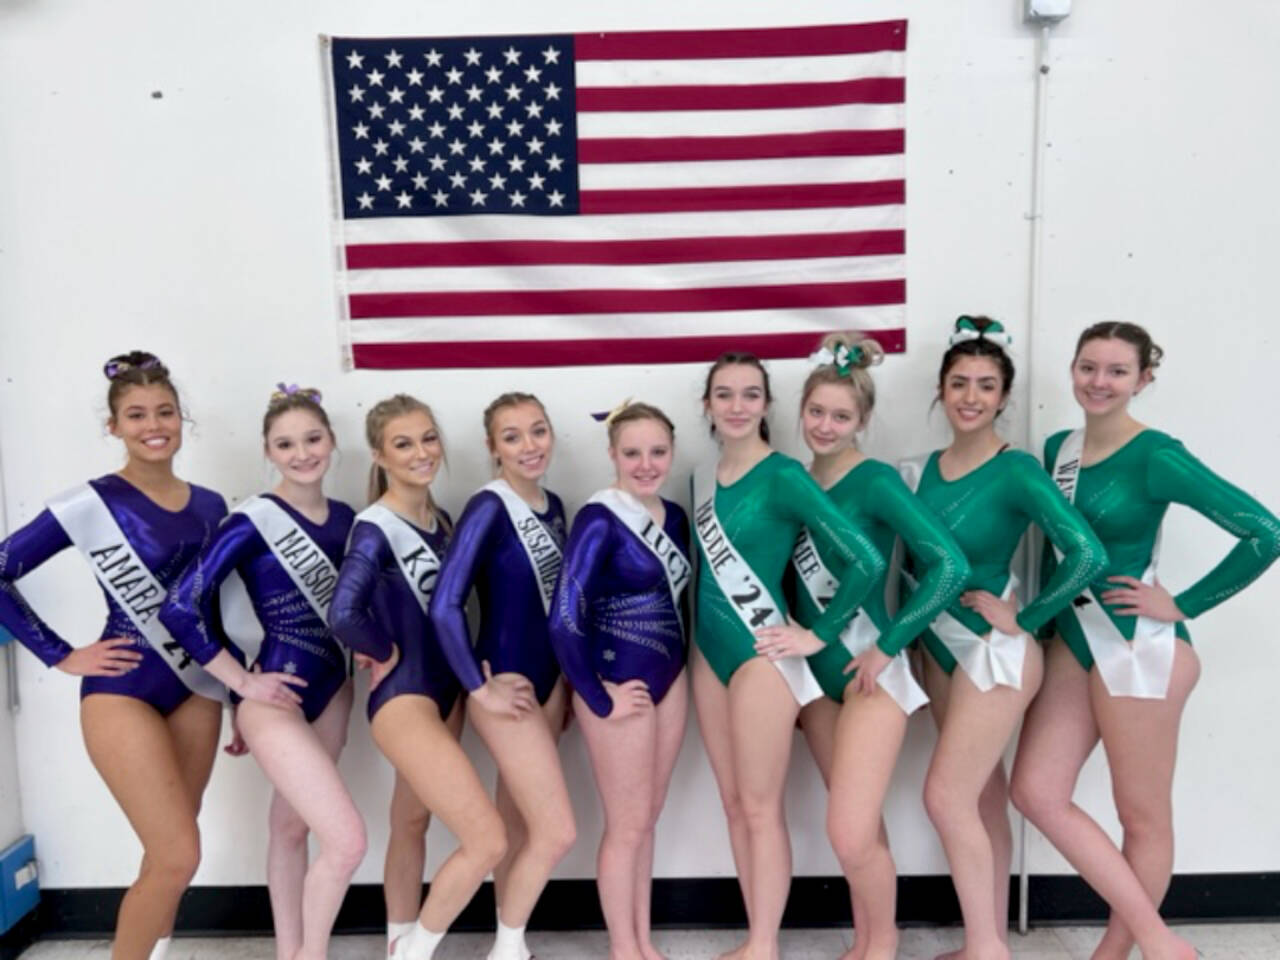 The Sequim/Port Angeles gymnastics team at subdistricts last weekend in Puyallup. From left, Sequim's Amara Brown,Madison Ripley, Kori Miller, Susannah Sharp and Lucy Spelker; Port Angeles' Maddie Adams, Summer Horst-Lowe, Chloe Notari and Waverly Mead. (Courtesy of Port Angeles/Sequim gymnastics)